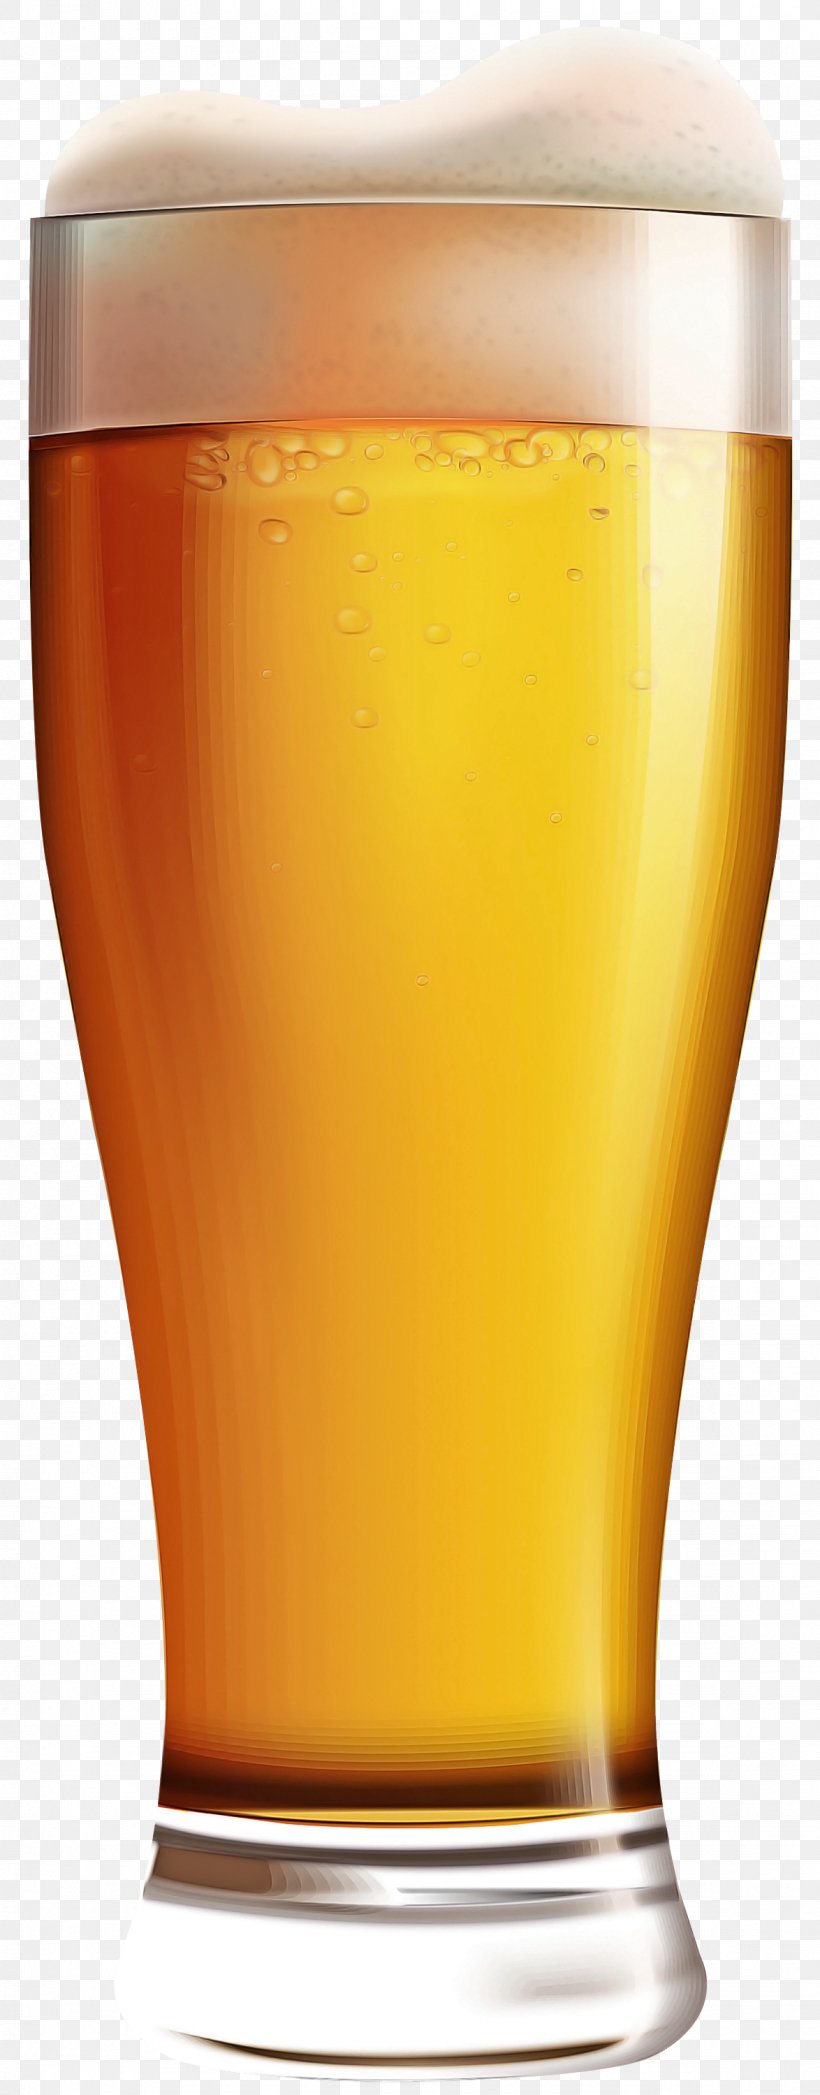 Beer Glass Pint Glass Drink Juice Yellow, PNG, 1174x3000px, Beer Glass, Alcoholic Beverage, Drink, Juice, Nonalcoholic Beverage Download Free